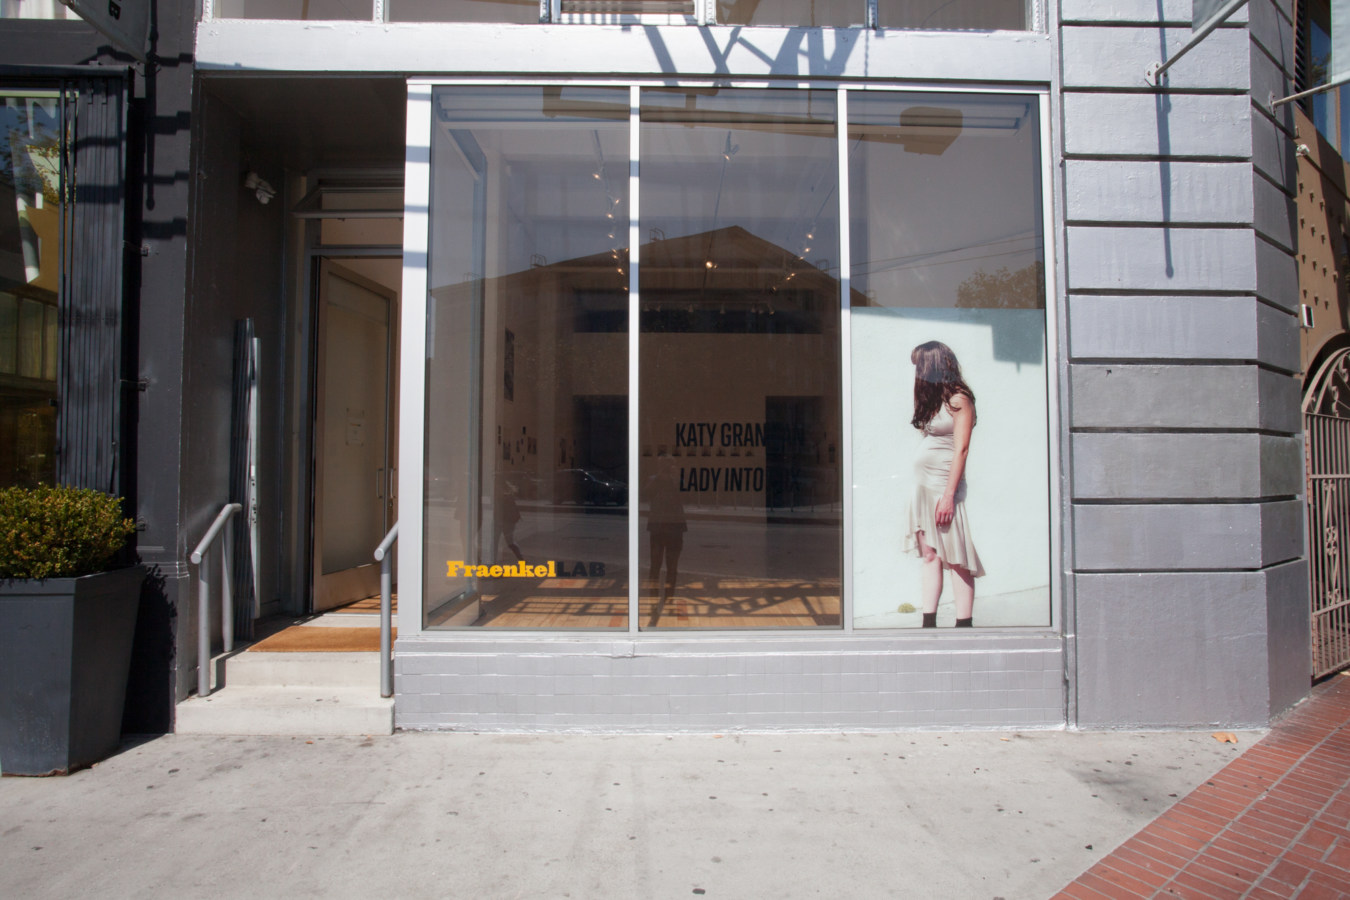 Color photograph of a gallery exterior with decal depicting a women in a dress with face covered with hair